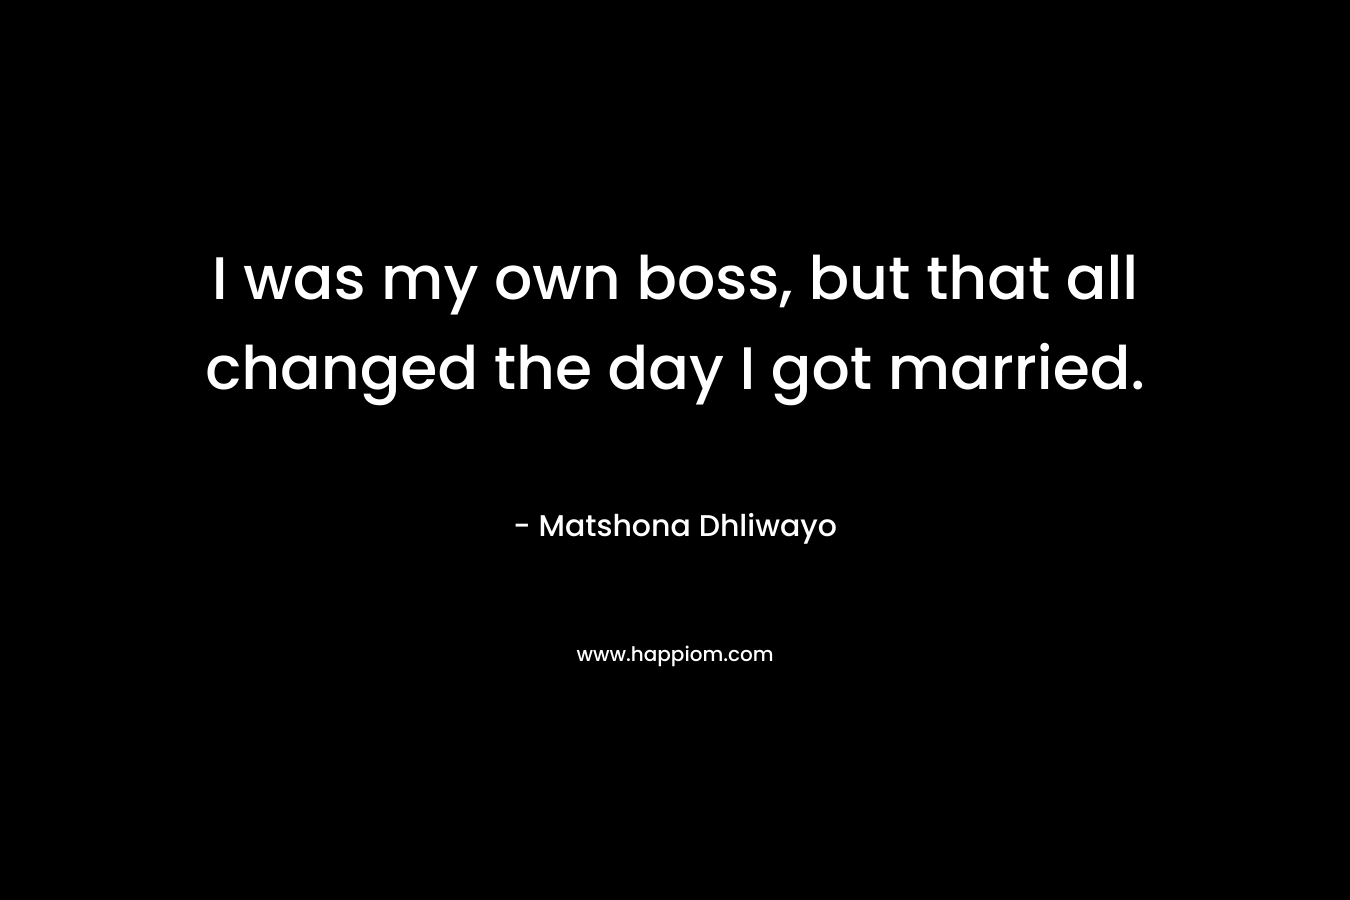 I was my own boss, but that all changed the day I got married.